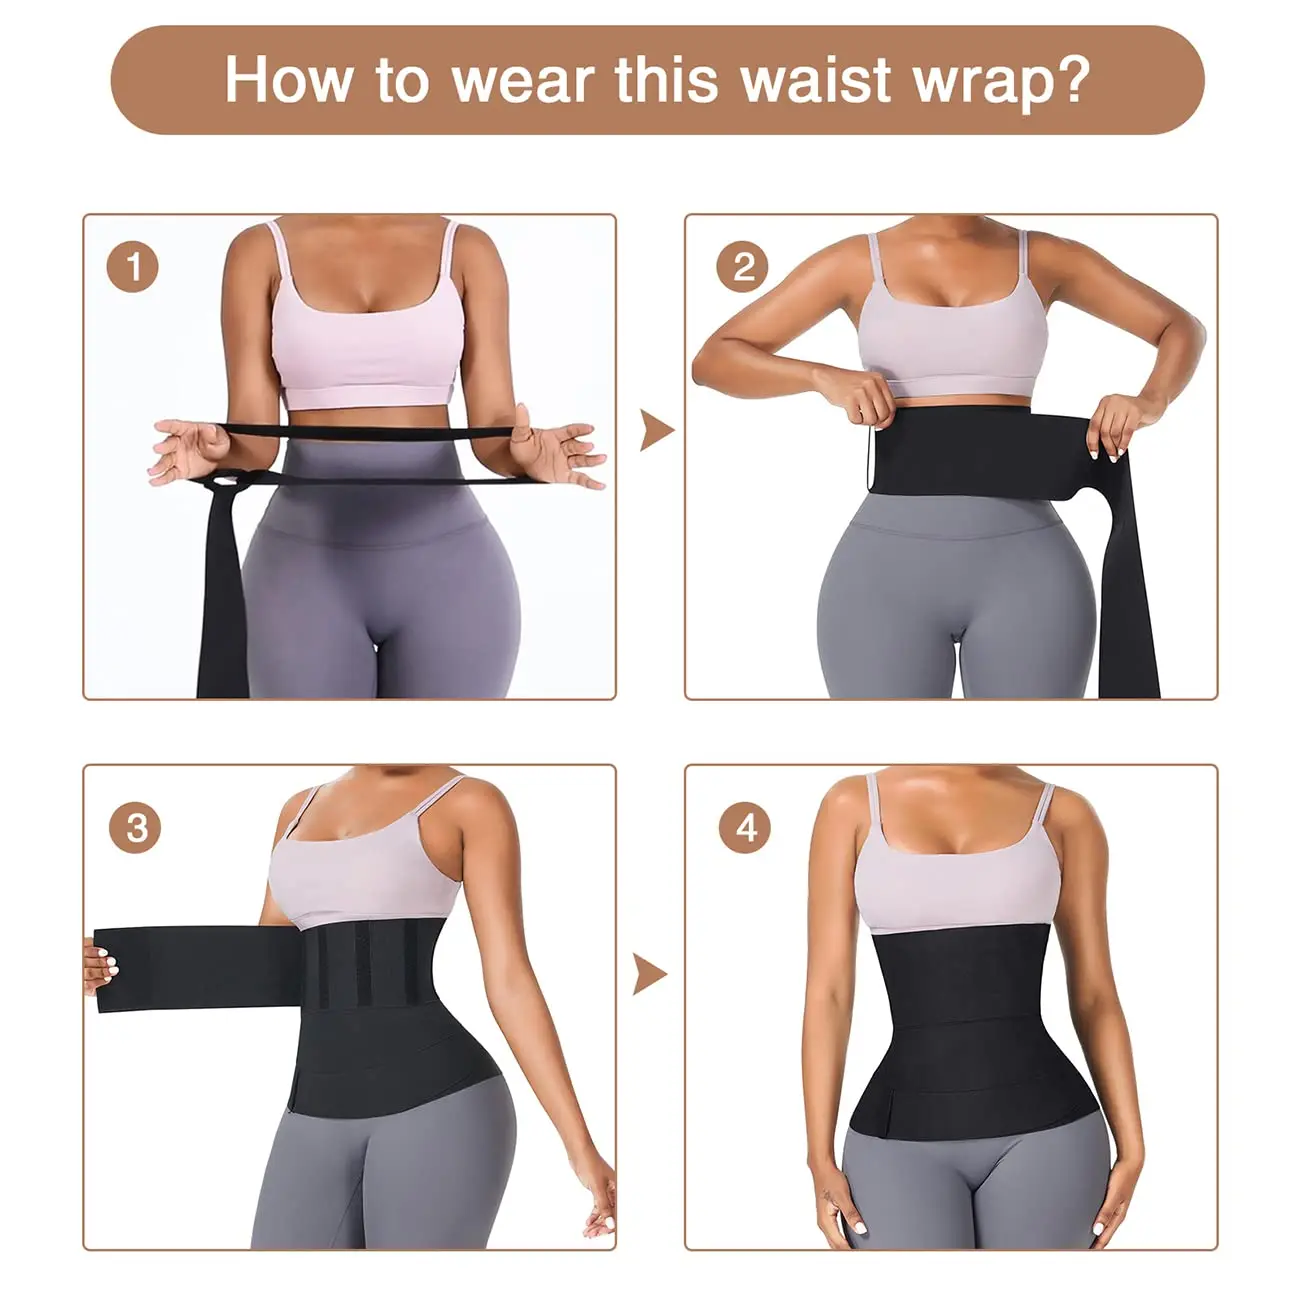 https://ae01.alicdn.com/kf/S59f3d114735a4901bdc3b3978ba2a3e0a/Waist-Trainer-for-Women-Tummy-Wrap-Waist-Trimmer-Belt-Slimming-Body-Shaper-Plus-Size-Invisible-Wrap.jpg